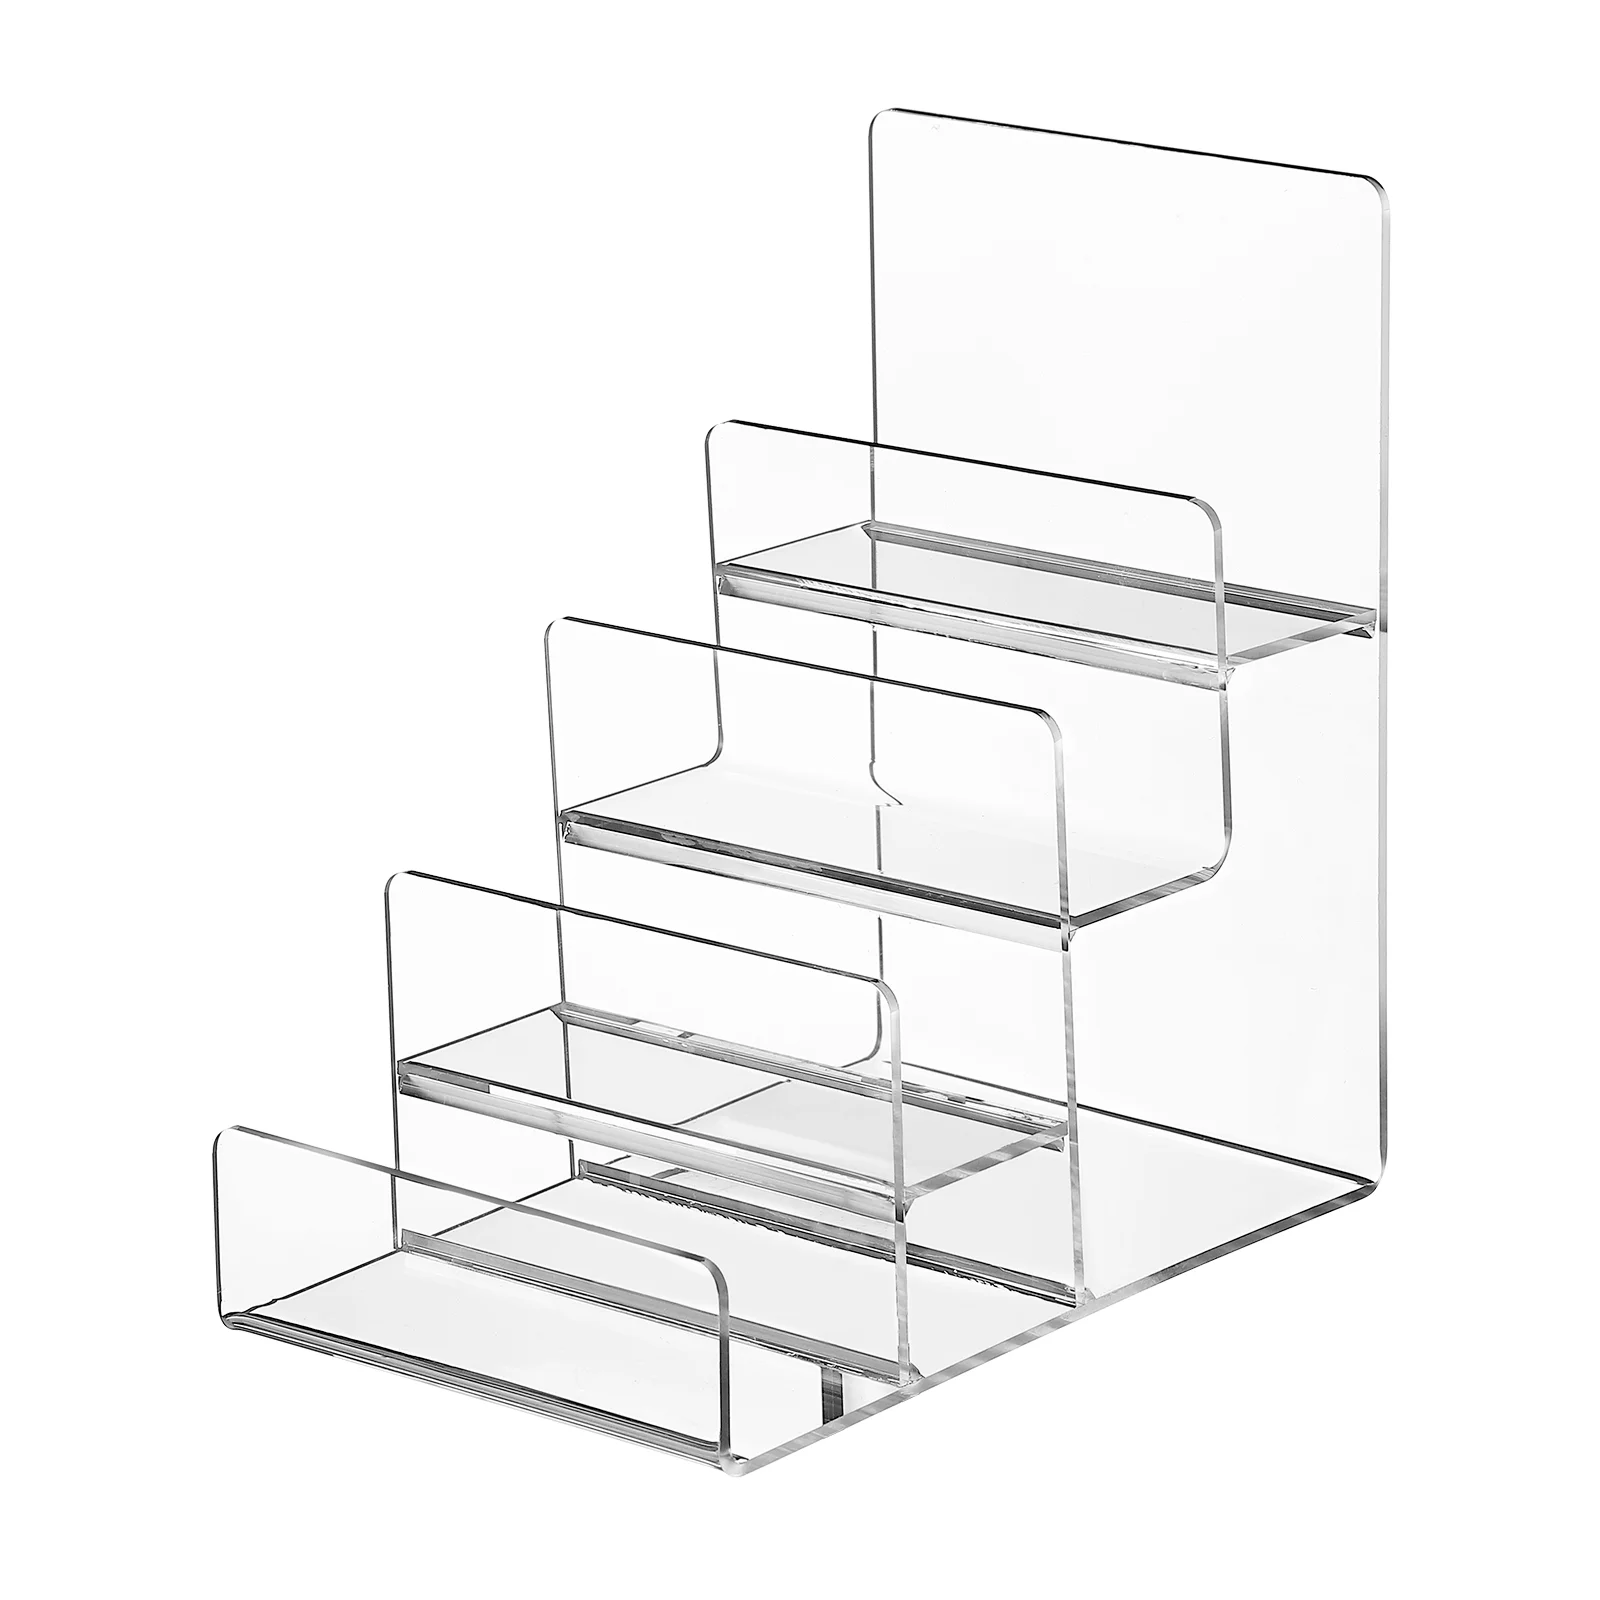 

Display Acrylic Stand Purse Organizer Risers Holder Wallet Shelf Clear Riser Rack Stands Storage Tier Table Sunglasses Perfume